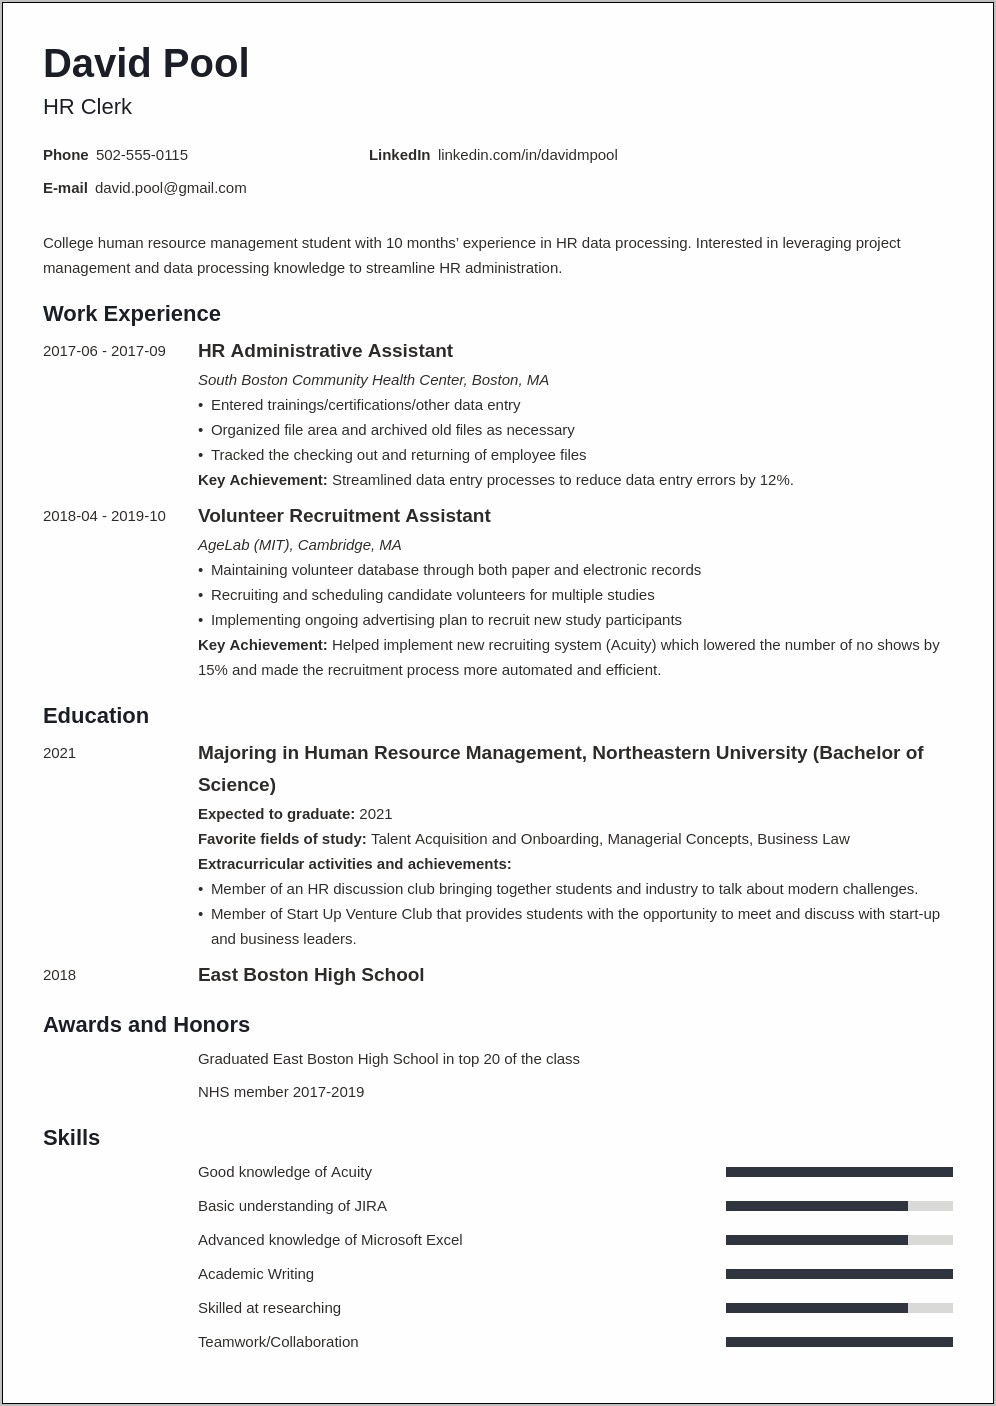 Resume Summary Examples Leaveraging Experience